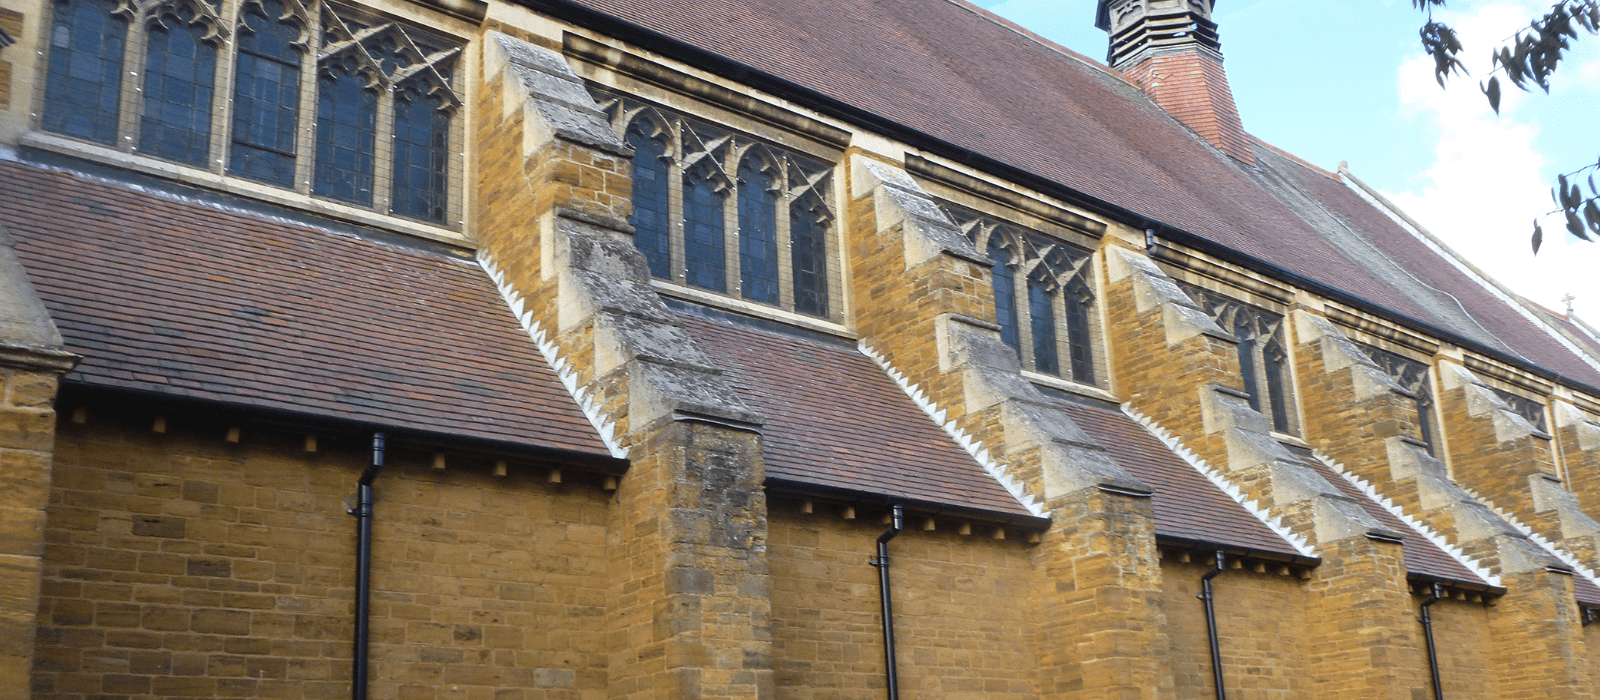 St Mary's Church, Kettering, Side View 2 Legacy No. 46 OG Gutter, Legacy PHR Gutter, Colonnade